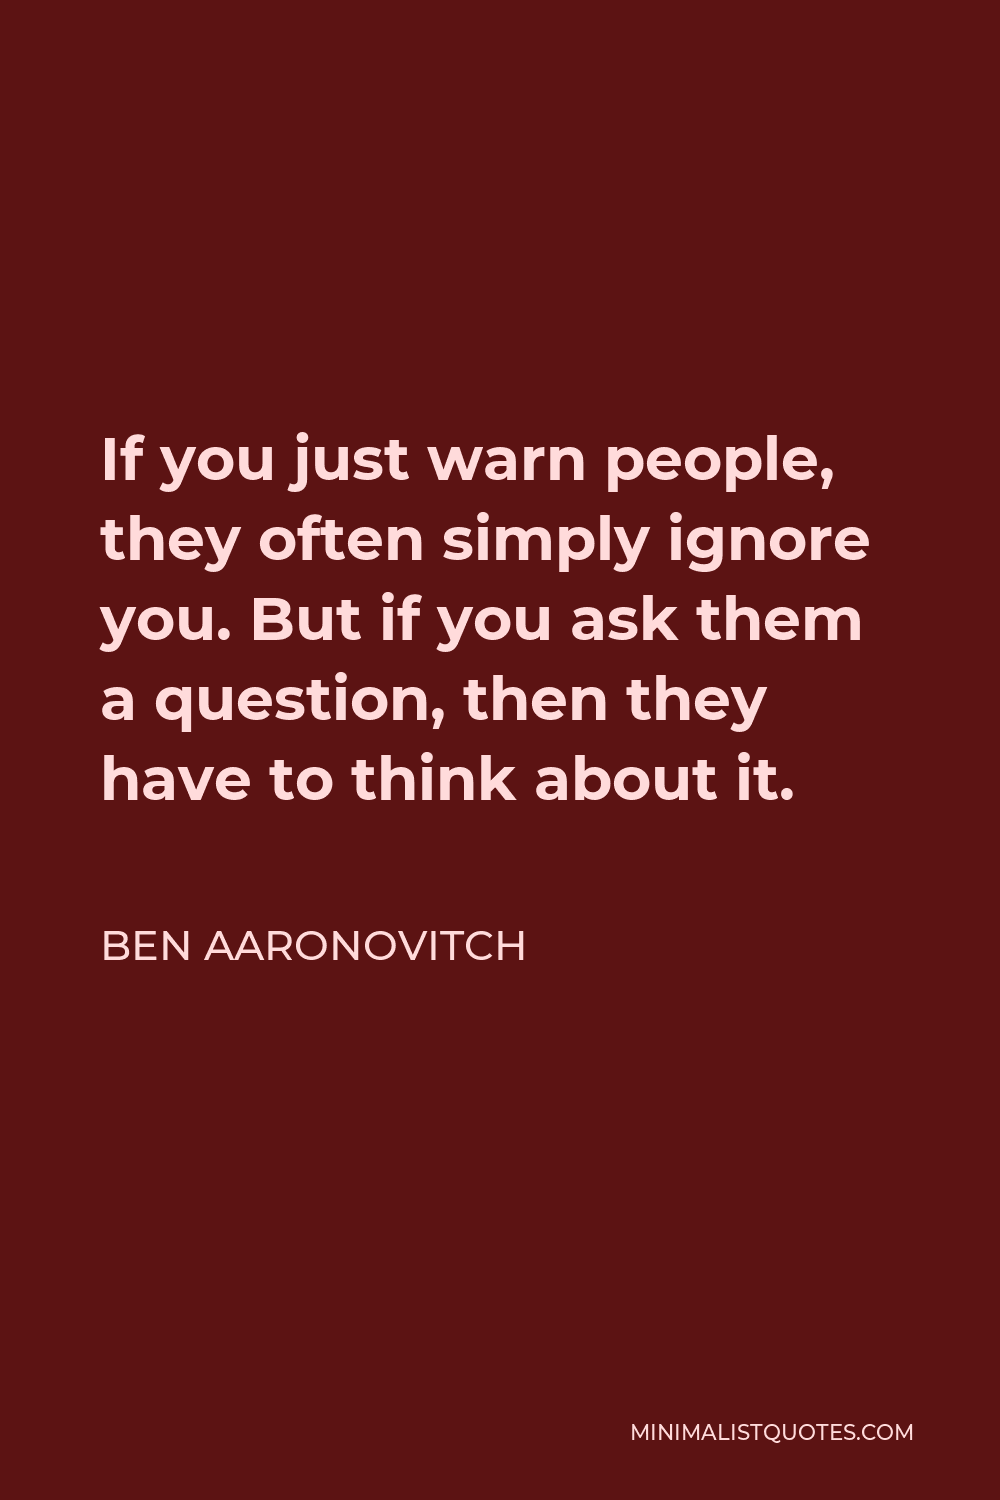 Ben Aaronovitch Quote - If you just warn people, they often simply ignore you. But if you ask them a question, then they have to think about it.